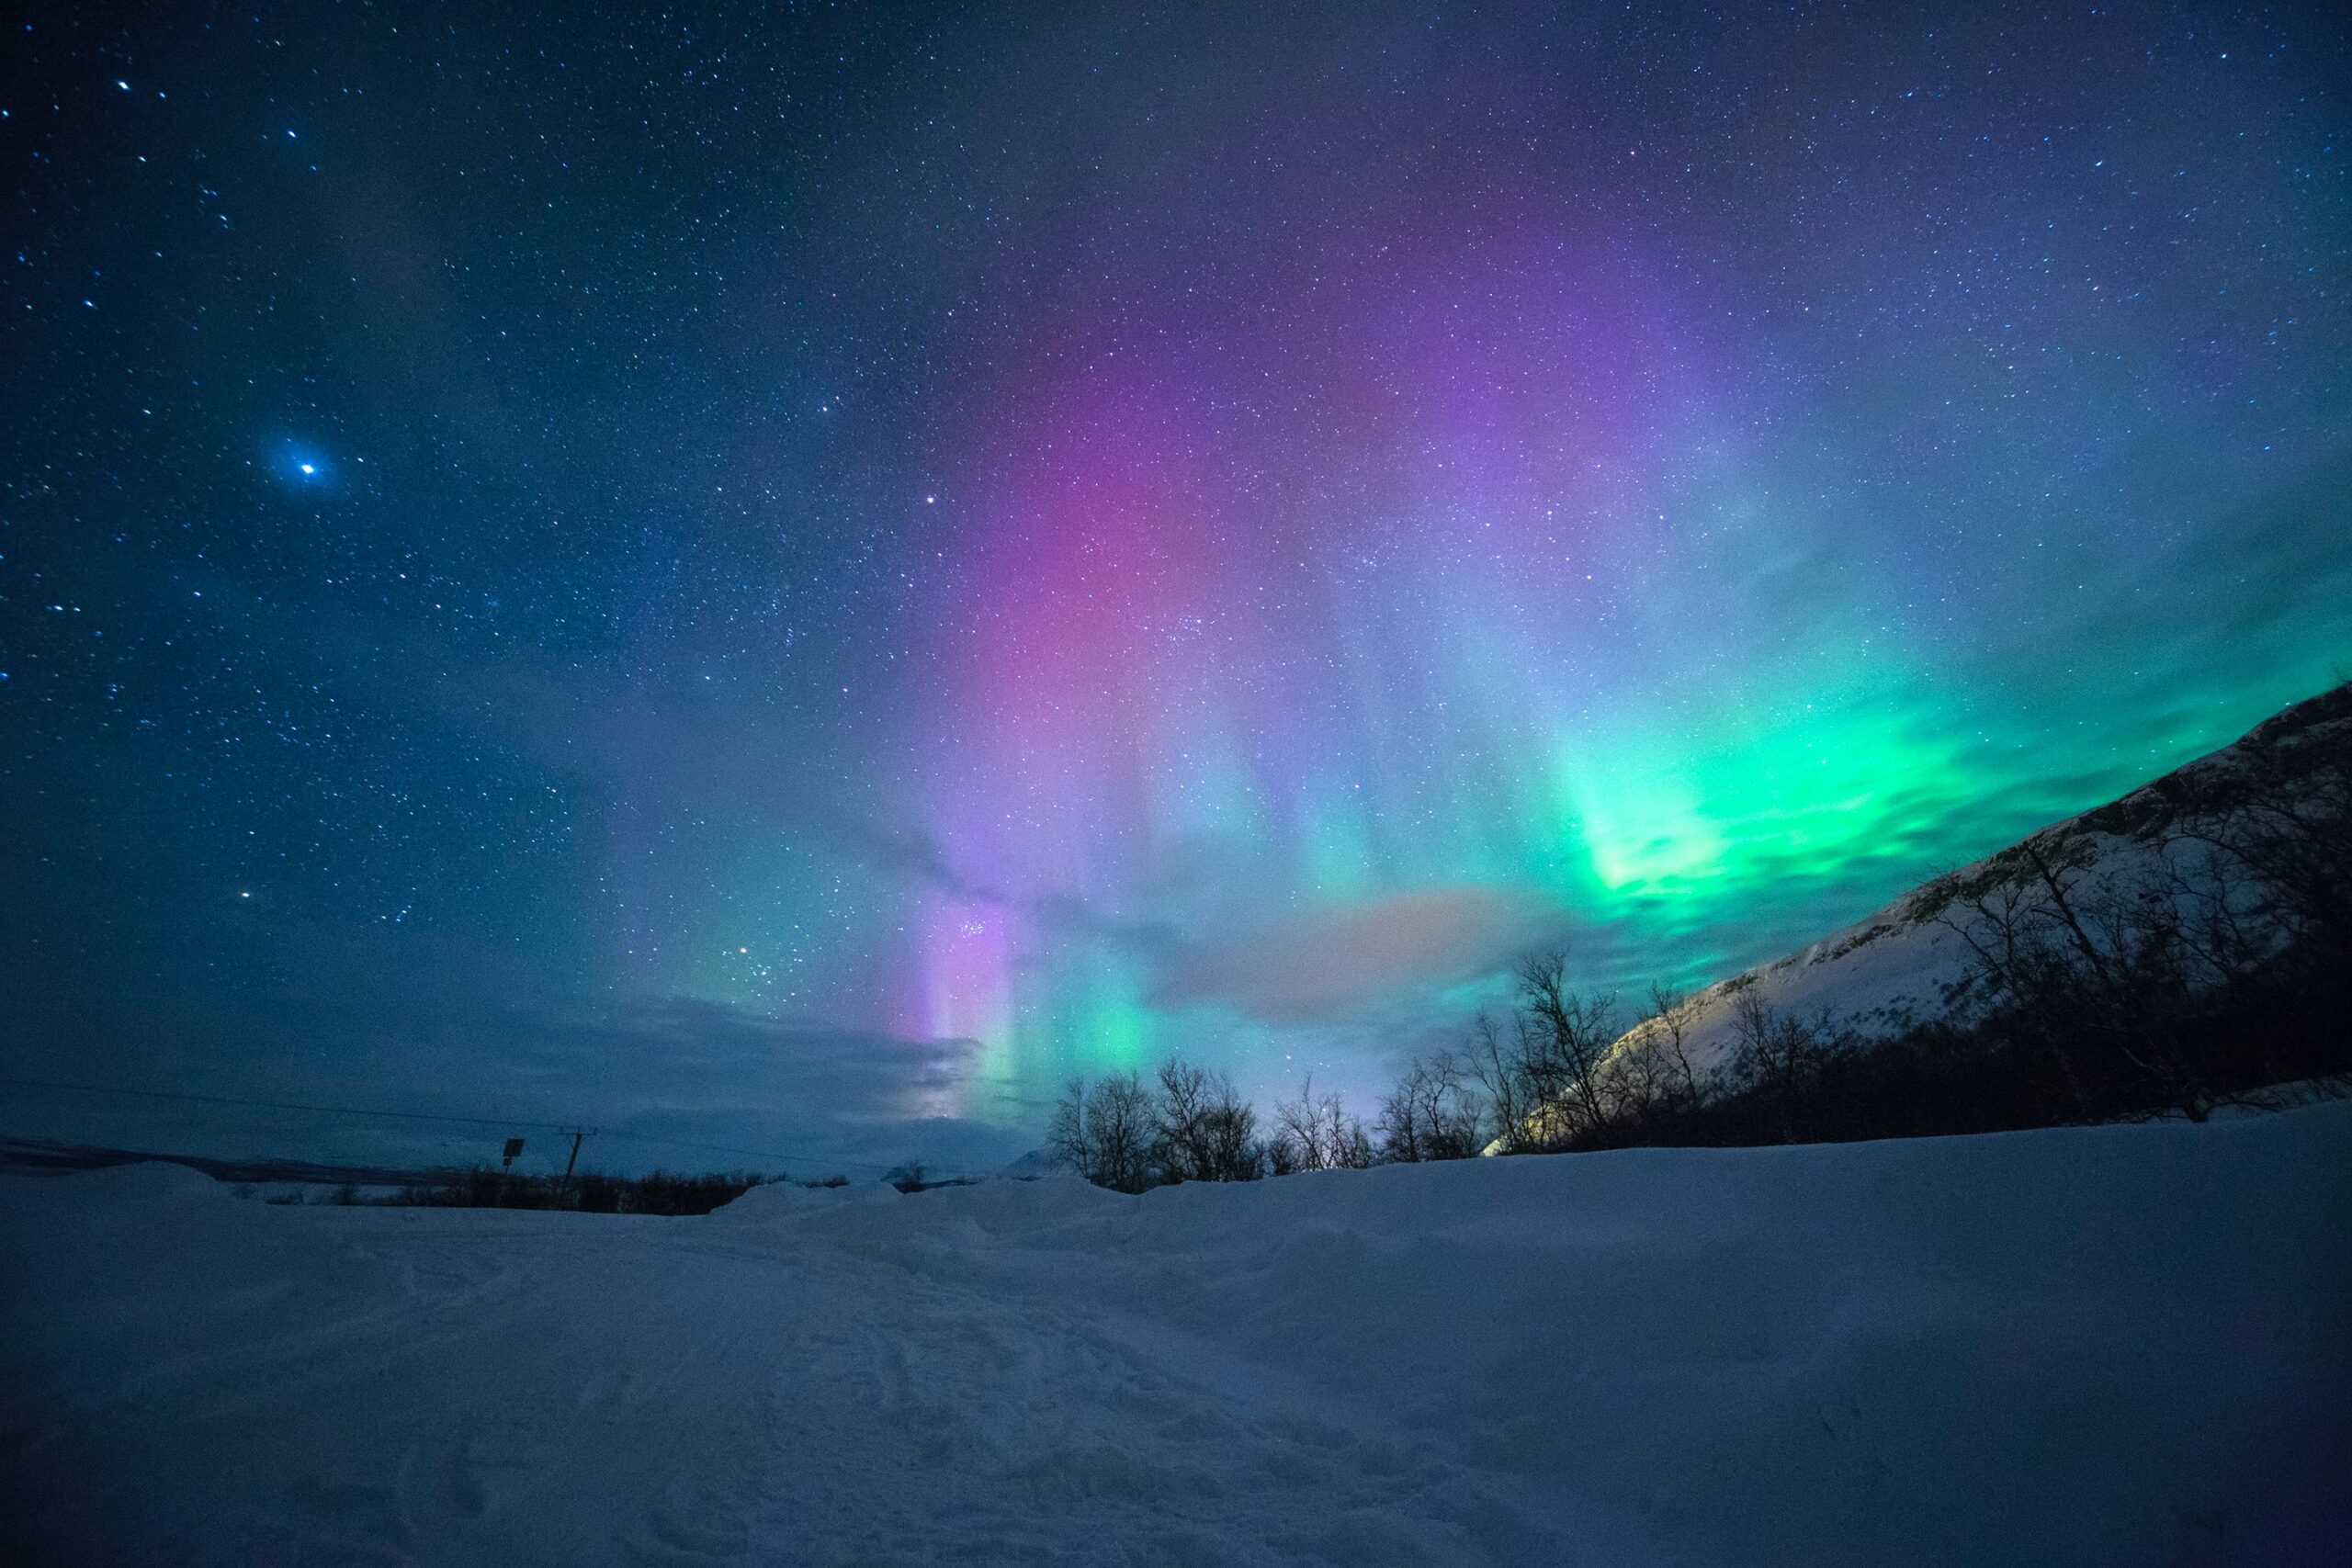 Aurora sky over icy winter forest at night